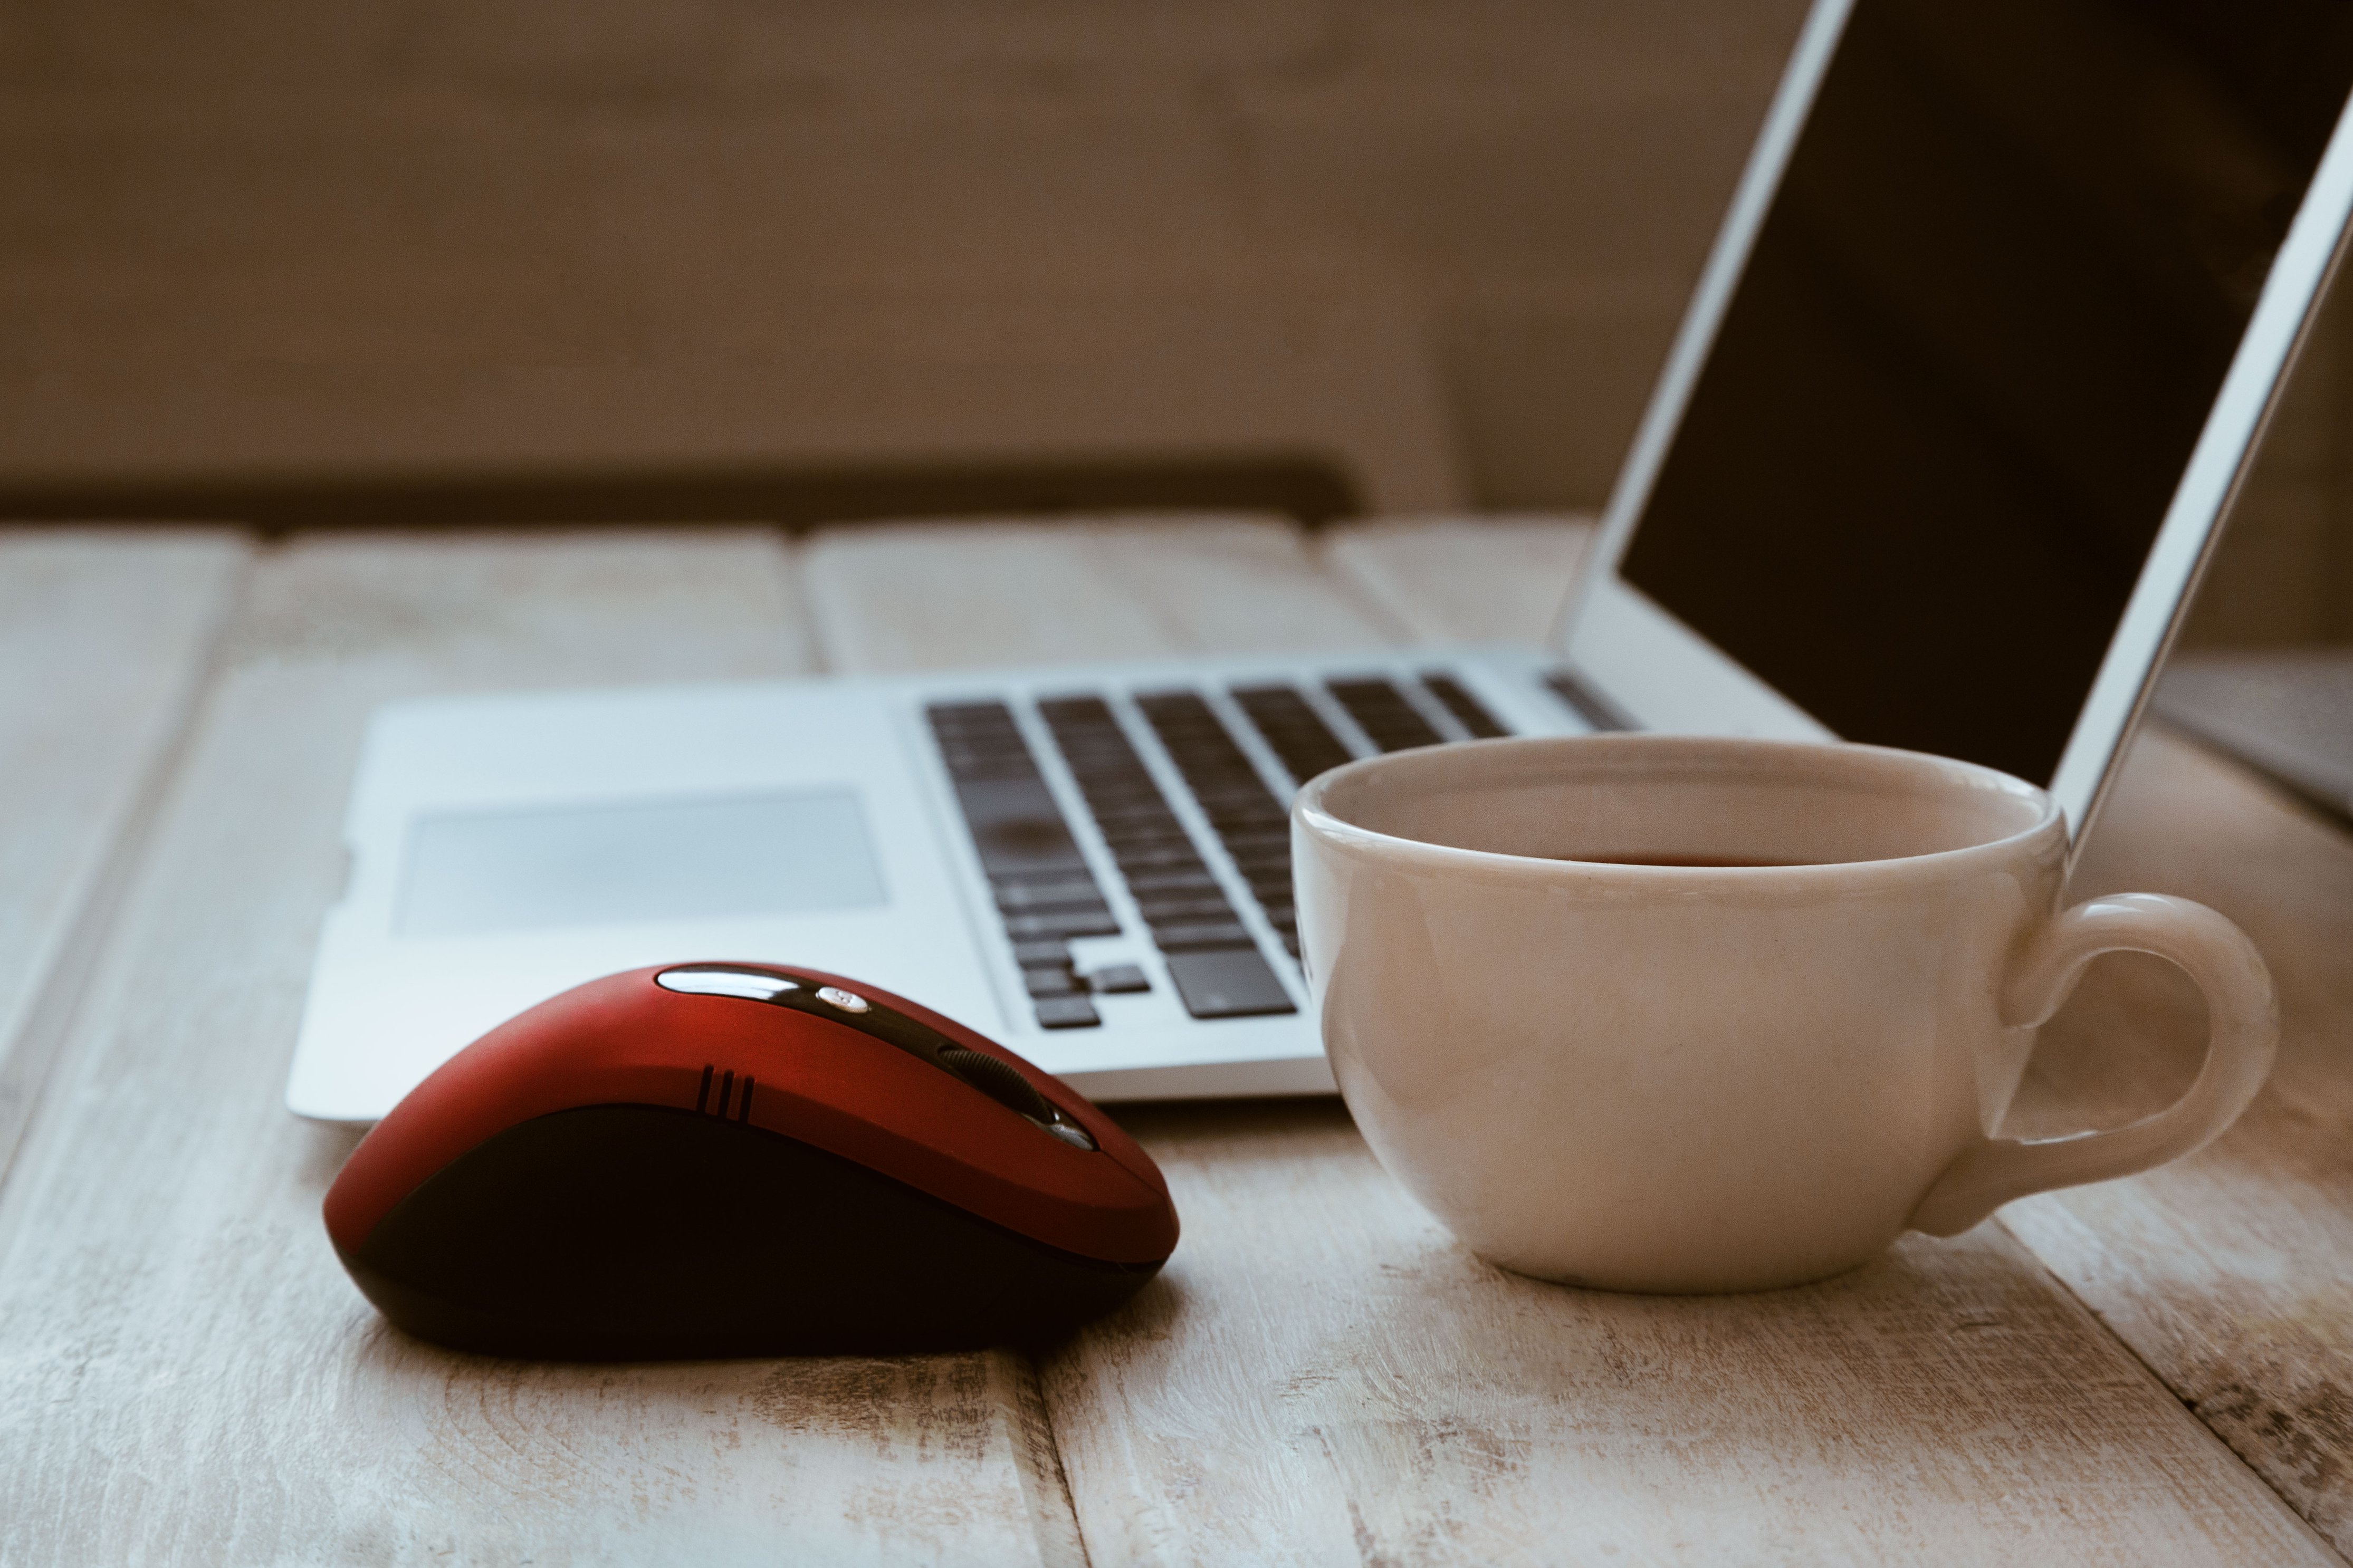 stock photo of a computer with a red mouse ad white coffee cup